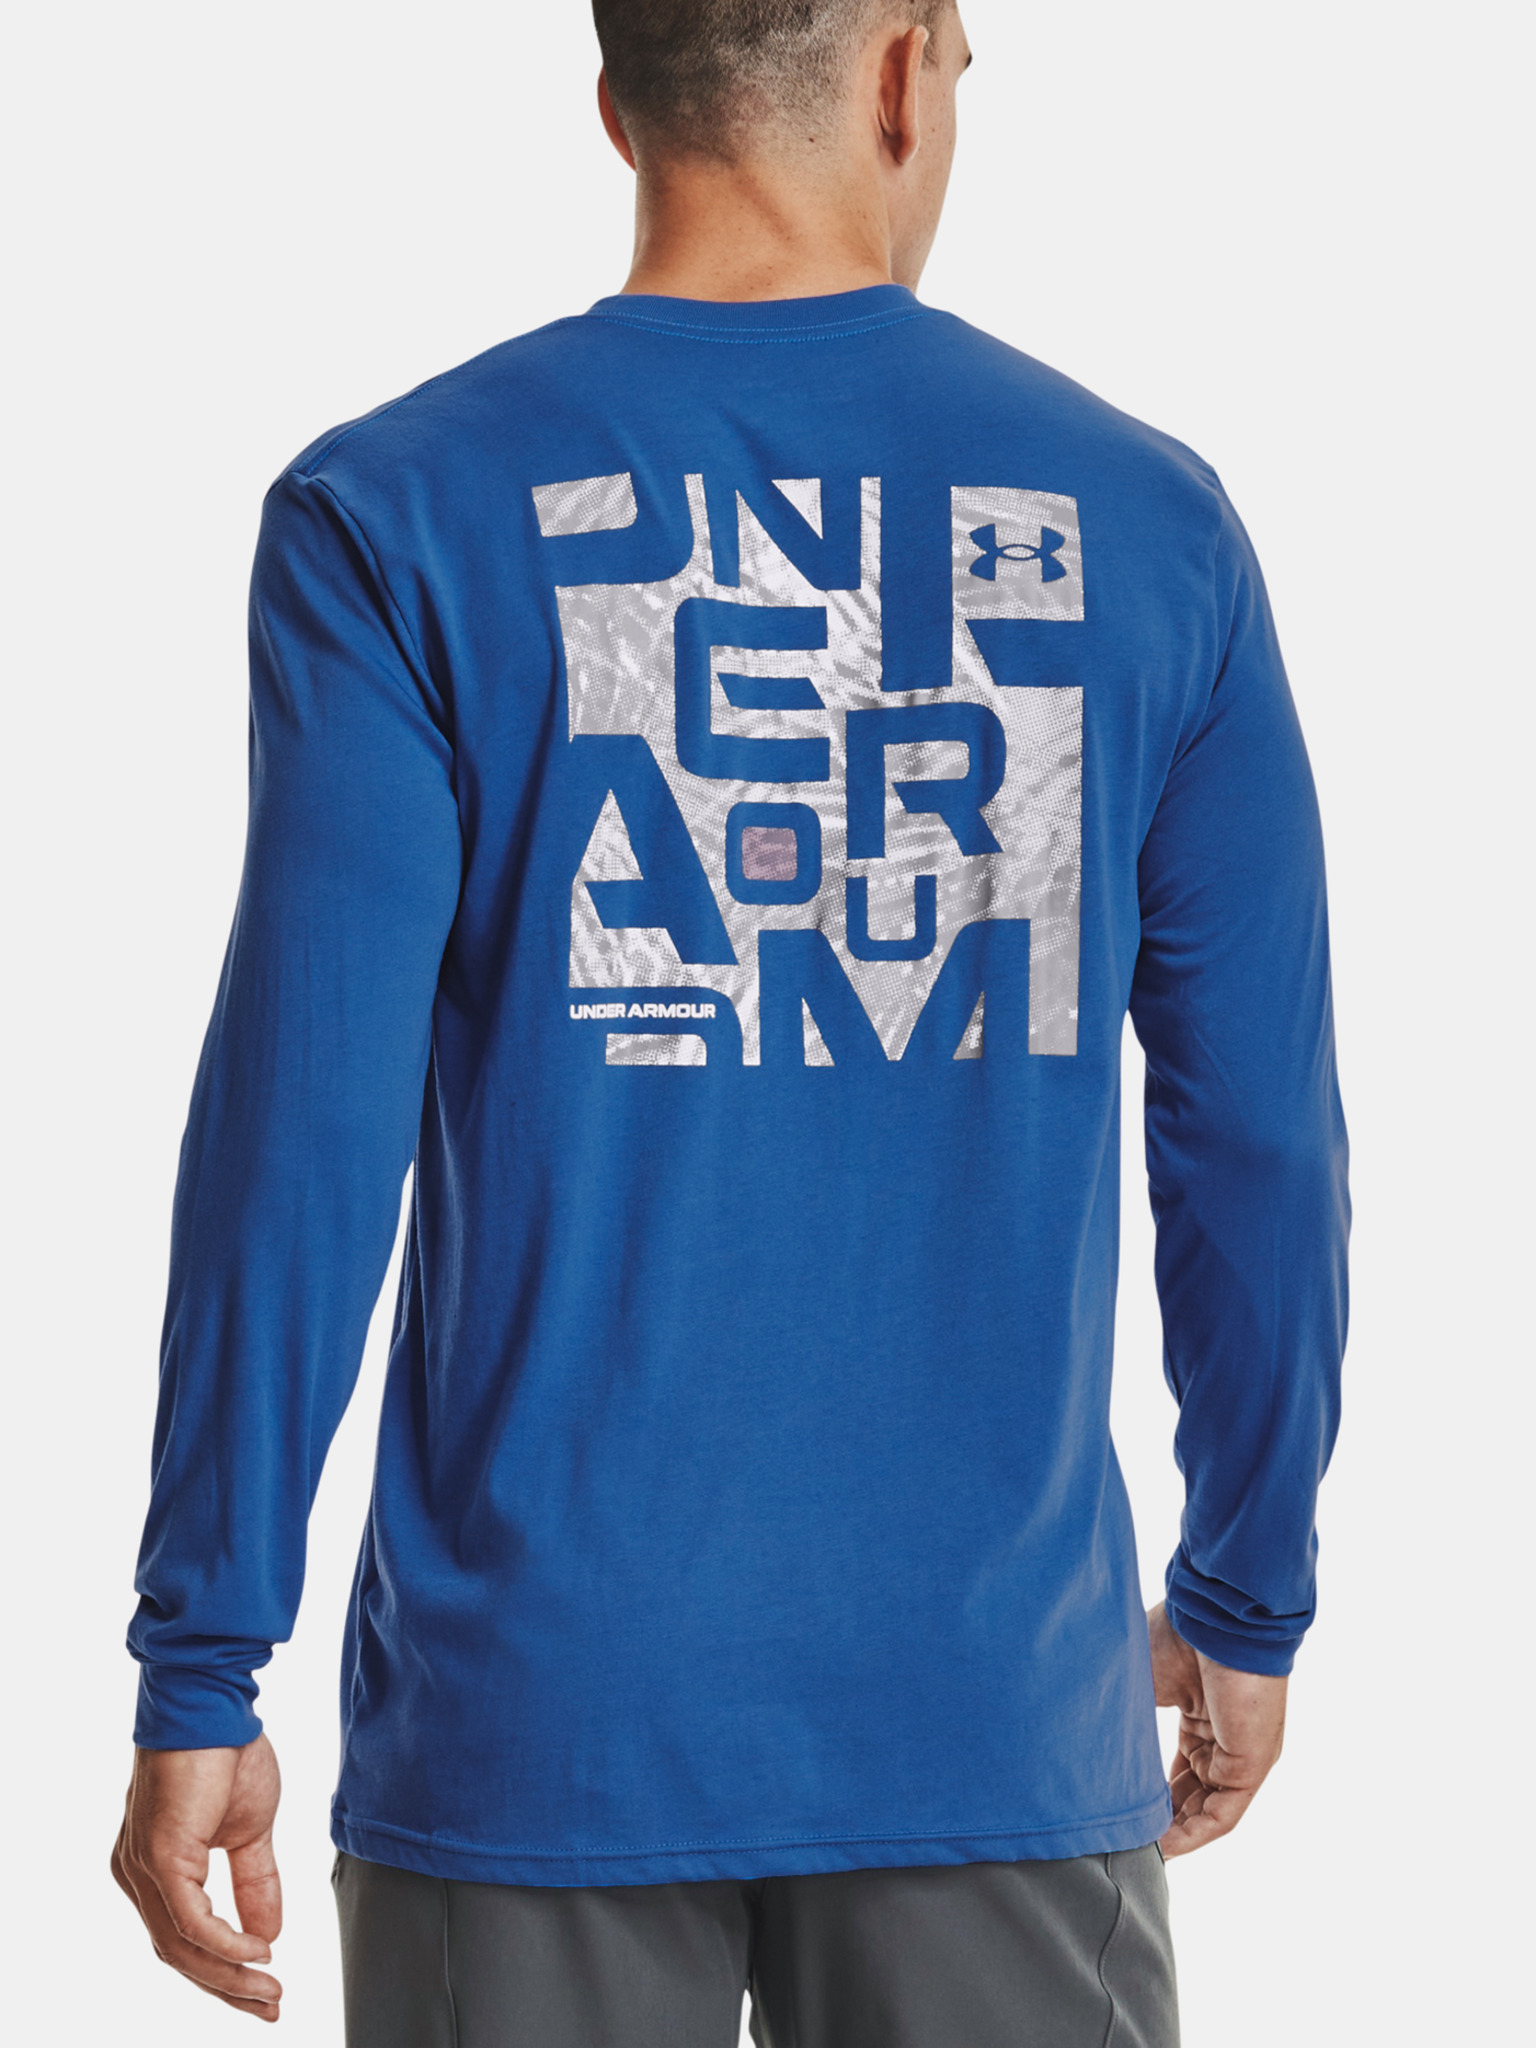 Under Armour - UA Outrun The Cpld LS T-shirt